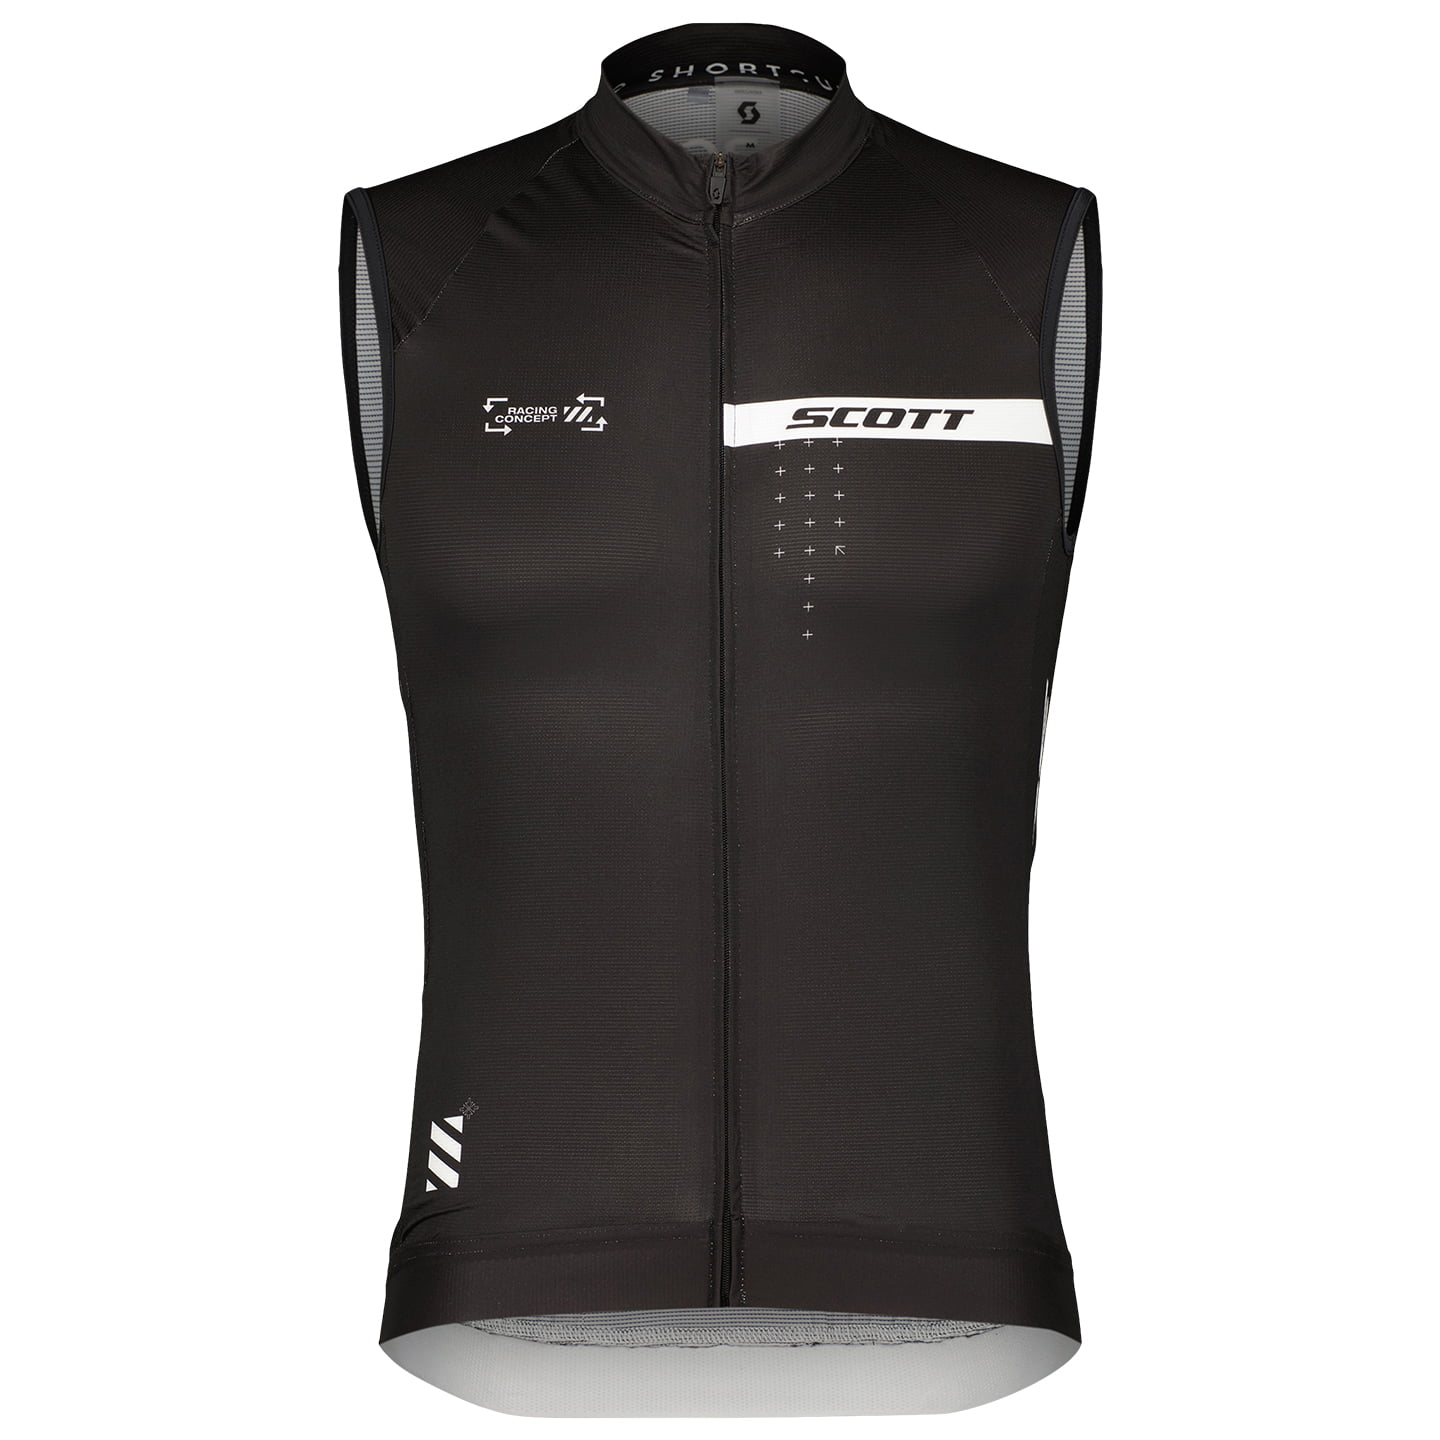 SCOTT RC Pro Sleeveless Jersey, for men, size S, Cycling jersey, Cycling clothing